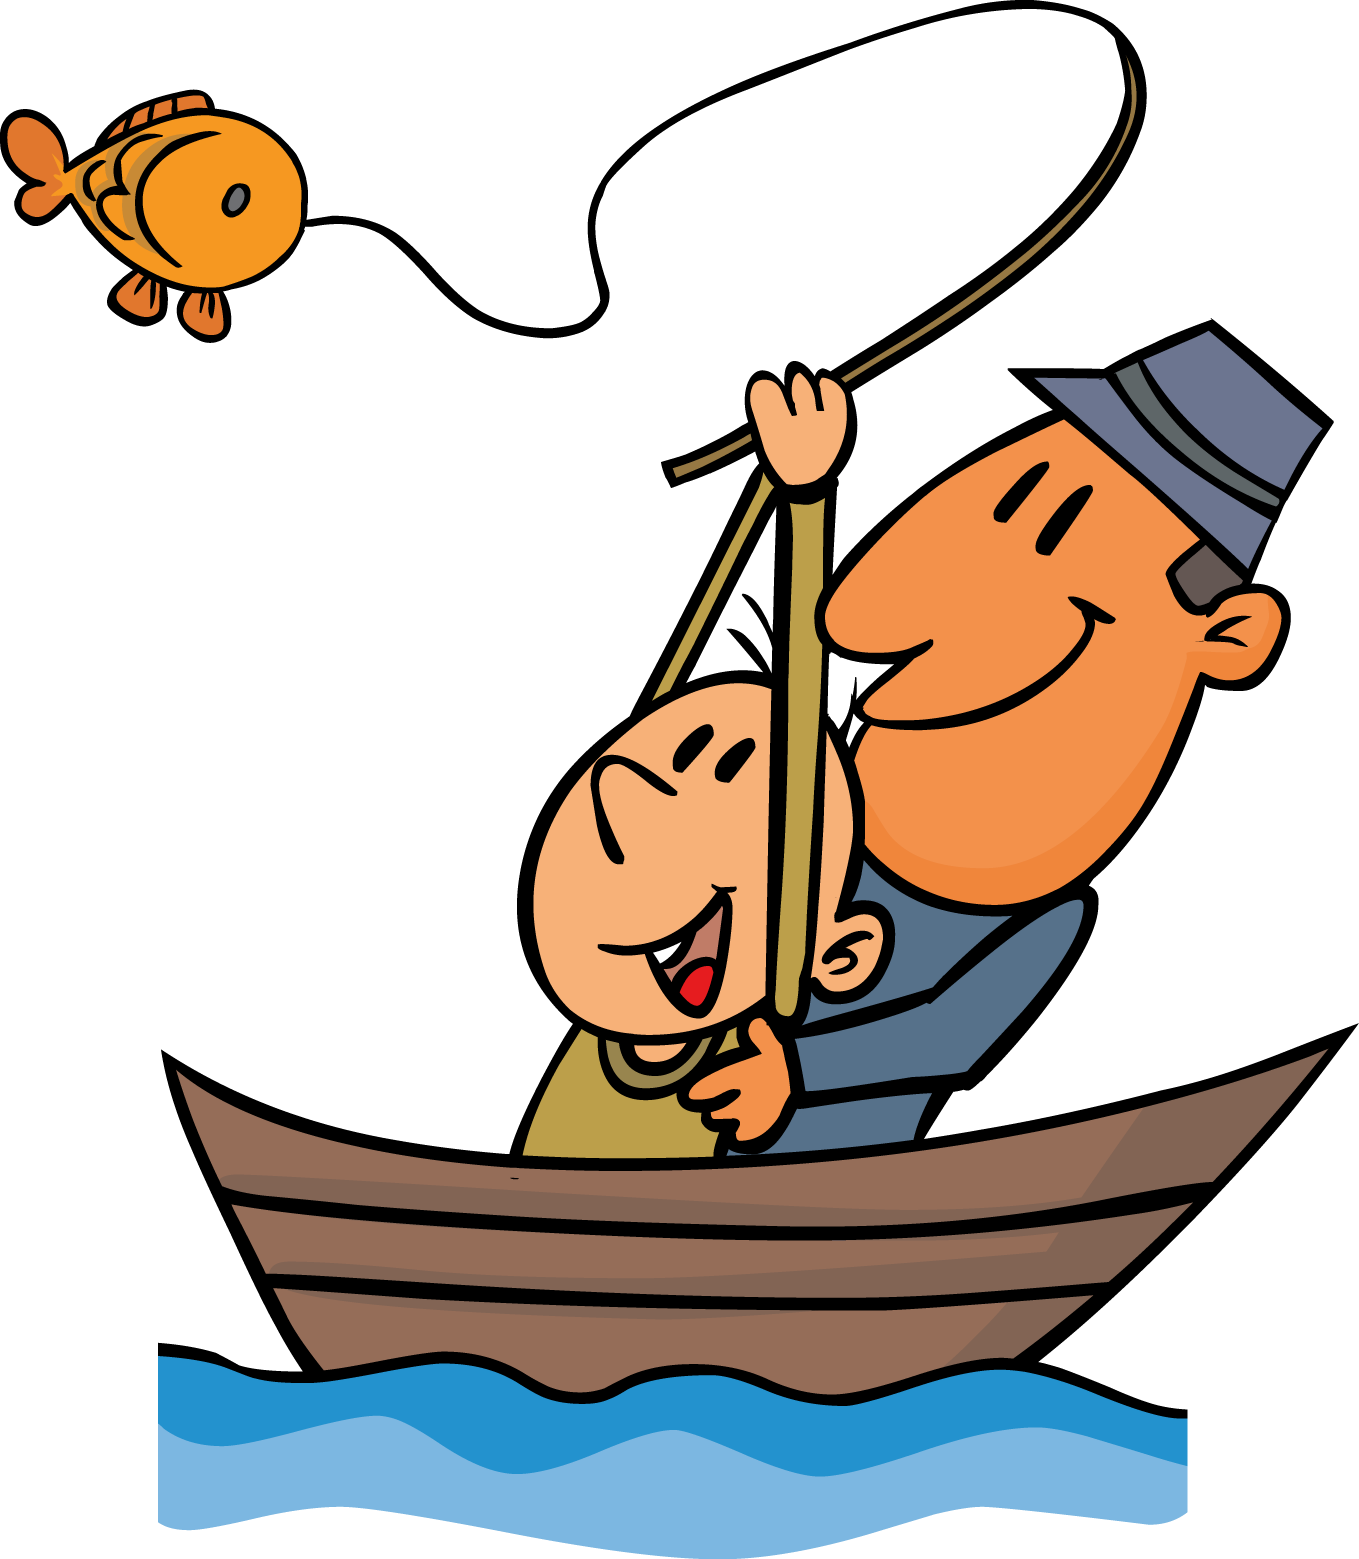 About Clipart - Go Fishing Clipart (1359x1559)